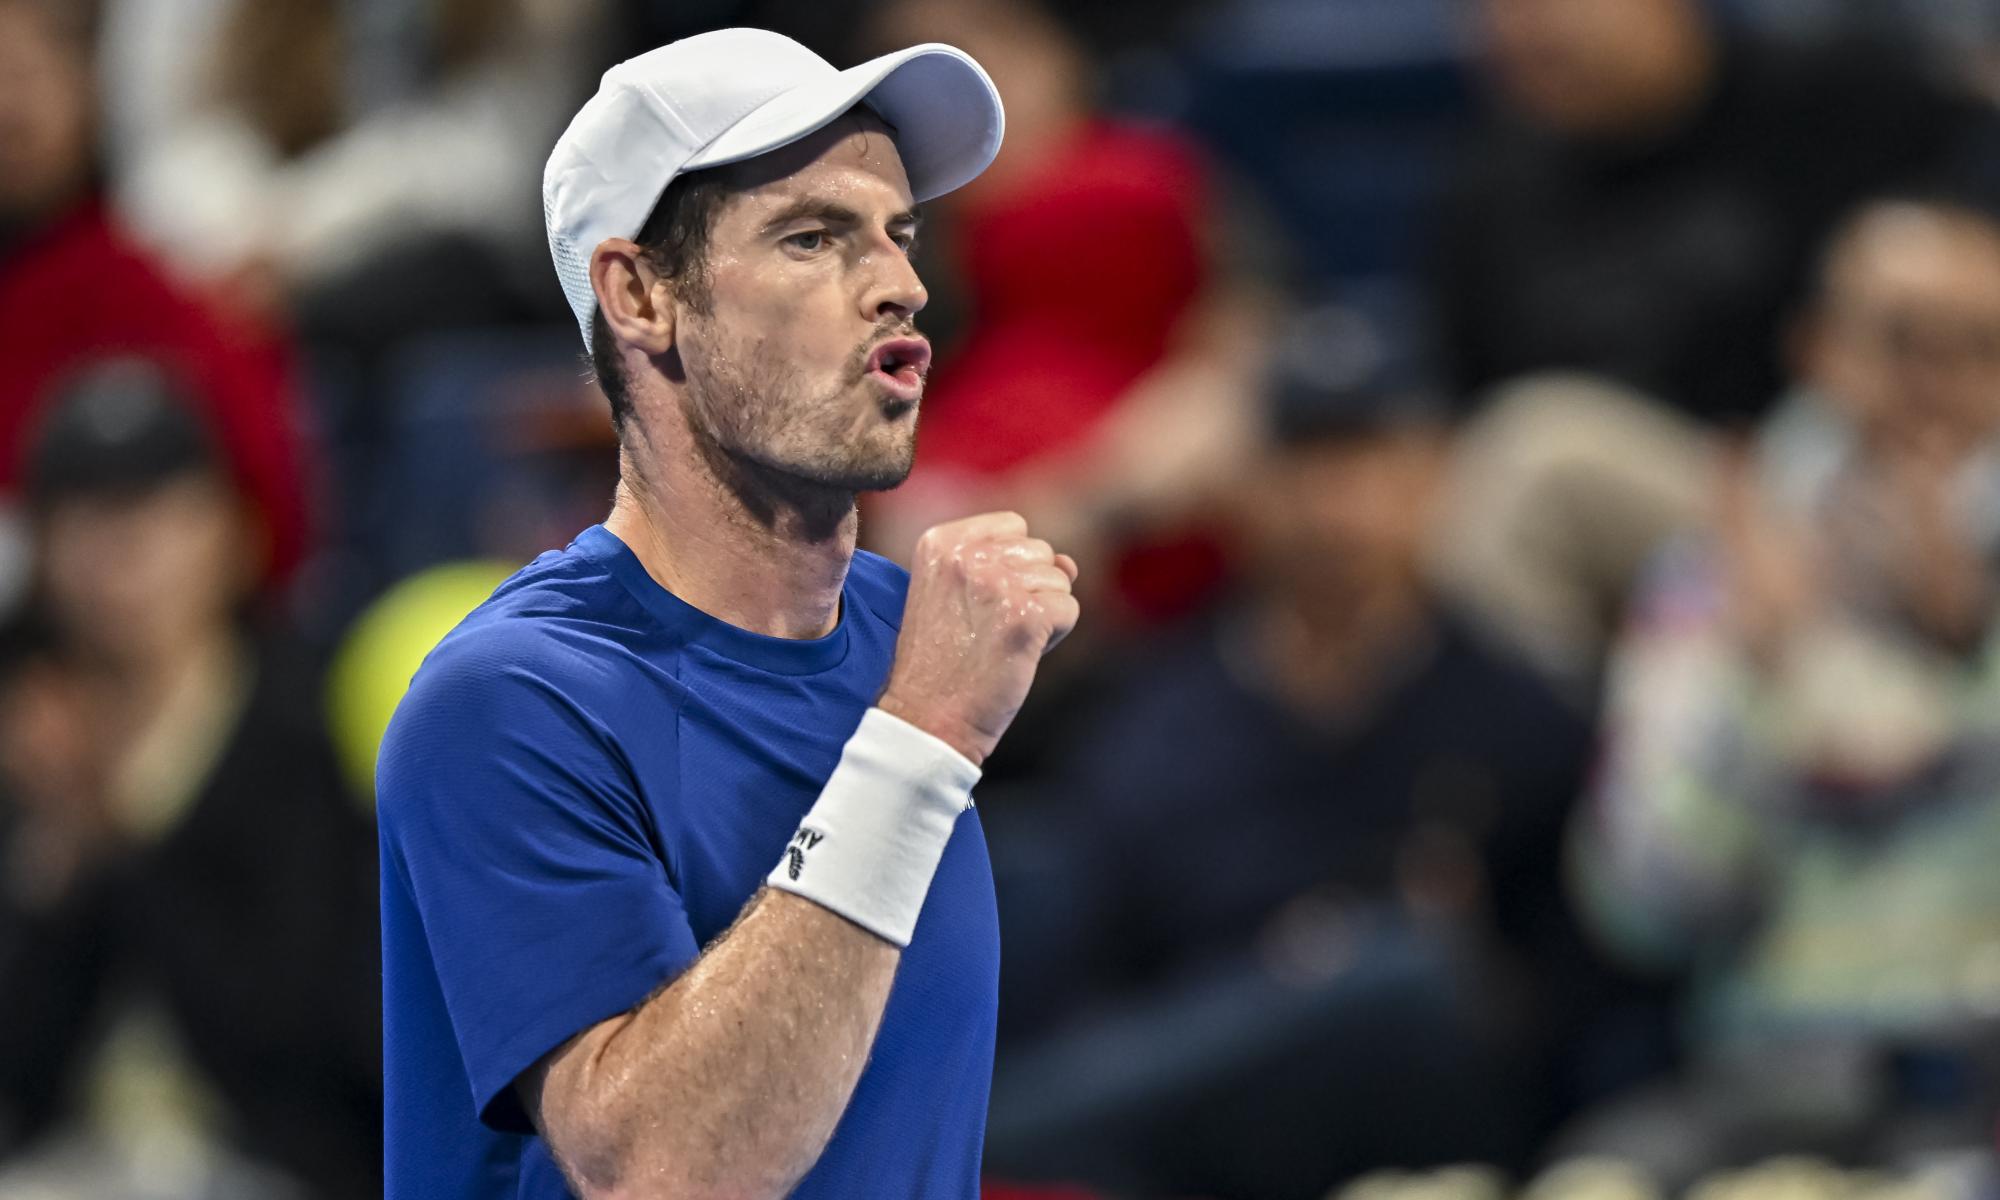 andy murray ends losing run with victory against müller at qatar open